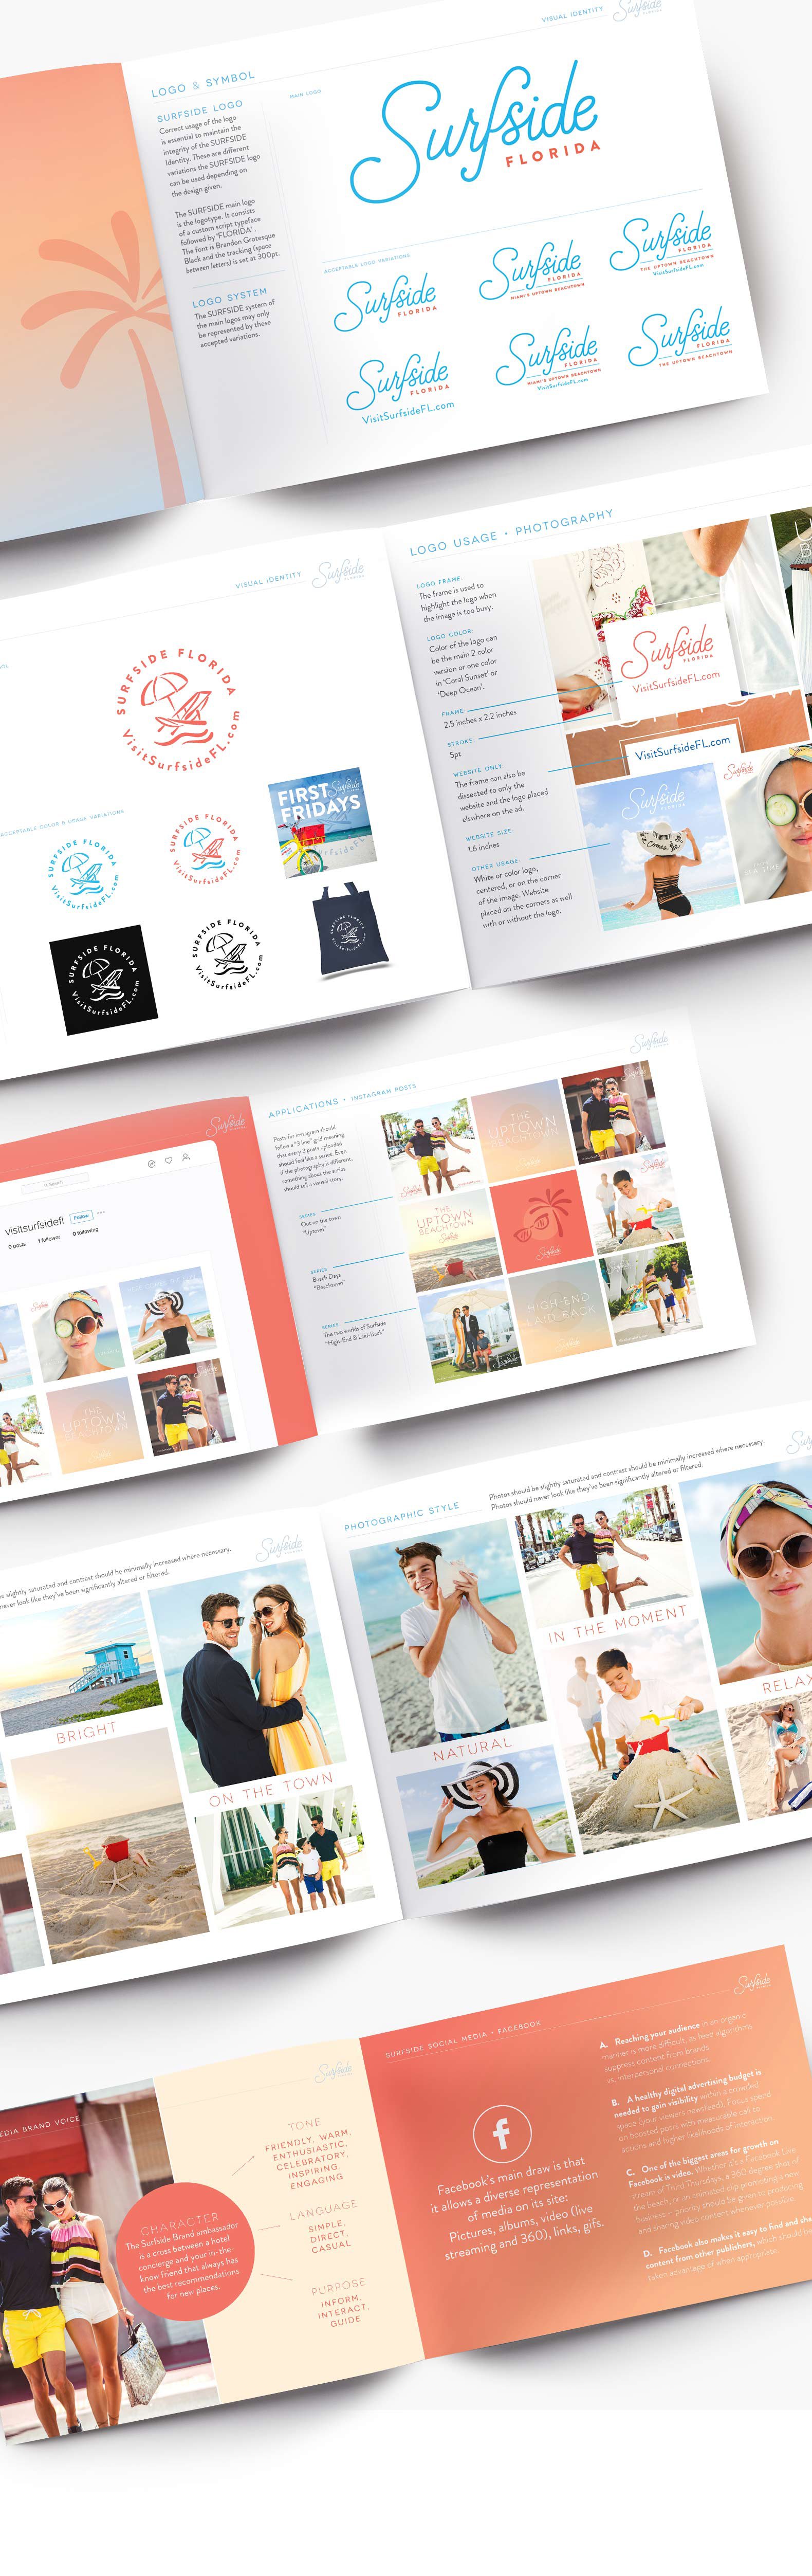 Jacober Creative Identity and Campaign for the Town of Surfside Florida - Photo of branding guidelines